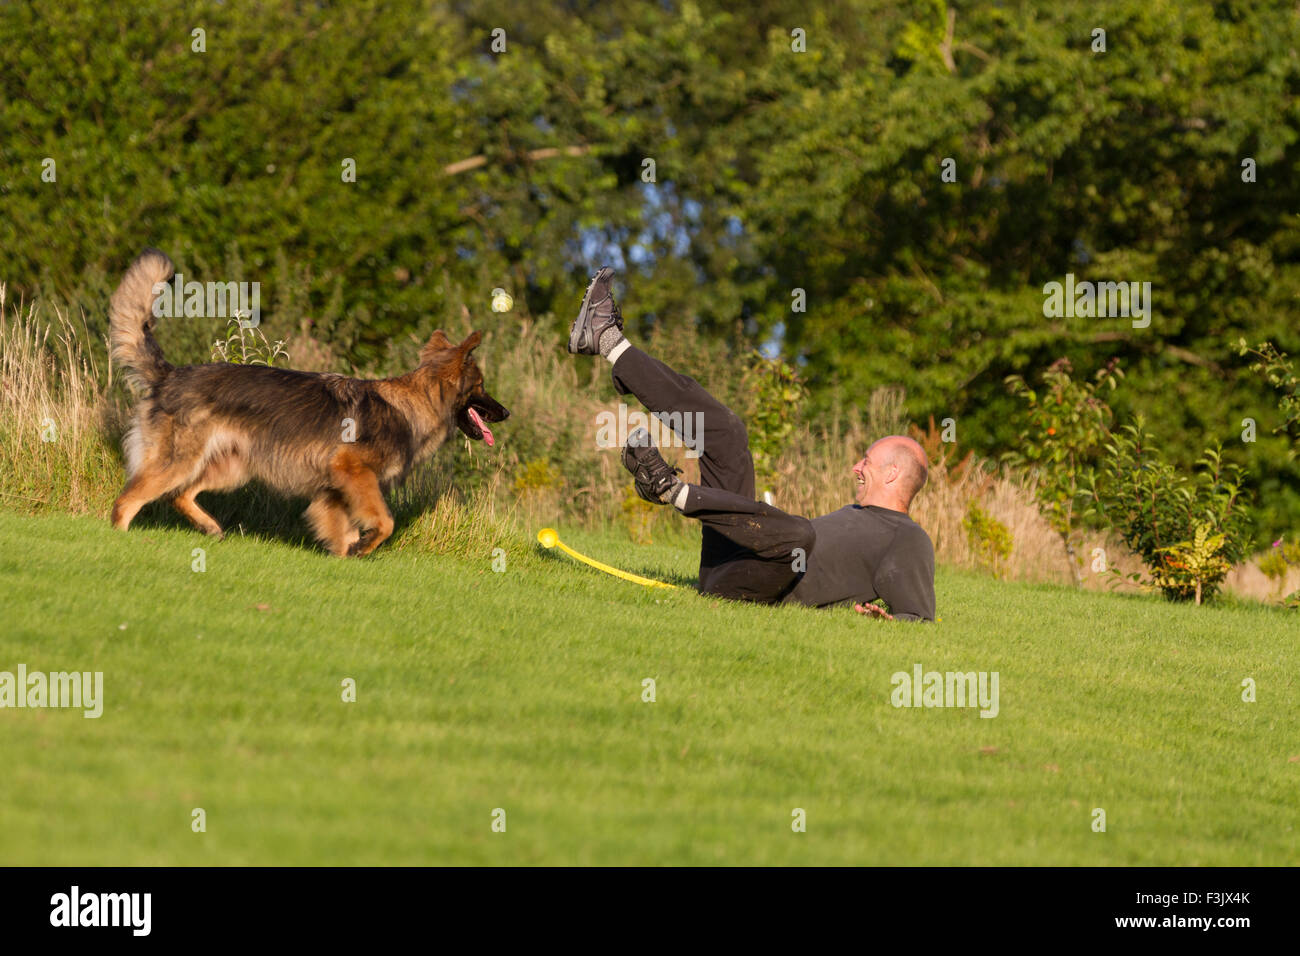 Man knocked over by Alsatian dog on grass Stock Photo